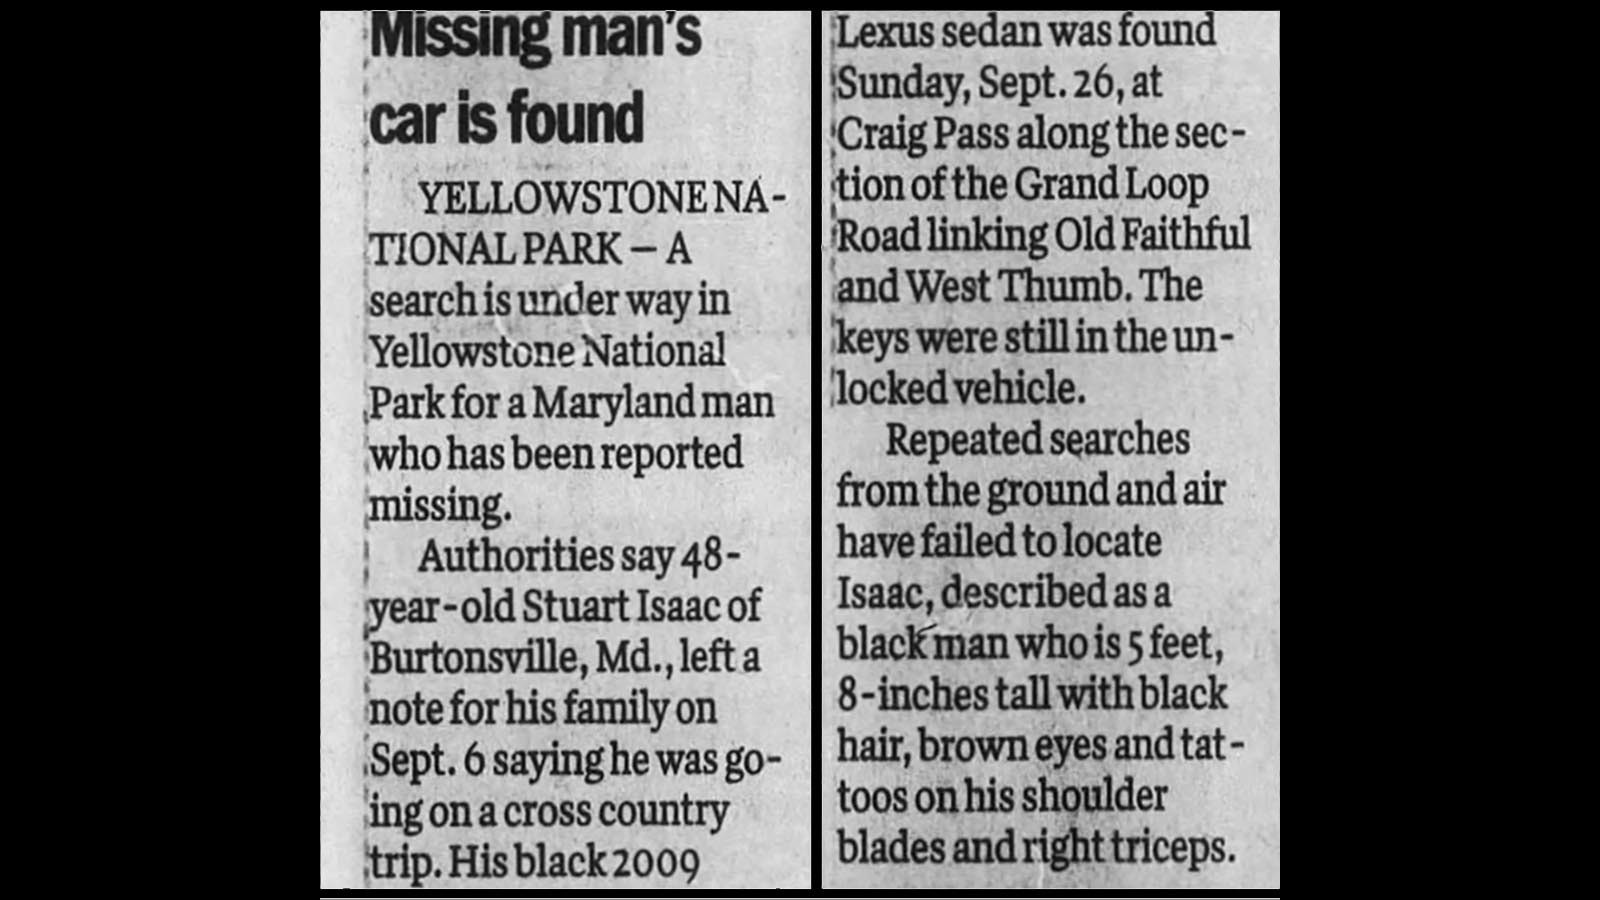 Stuart Isaac of Burtonsville, Maryland, was 48 when his abandoned vehicle was found in Yellowstone National Park on Sept. 26, 2010.